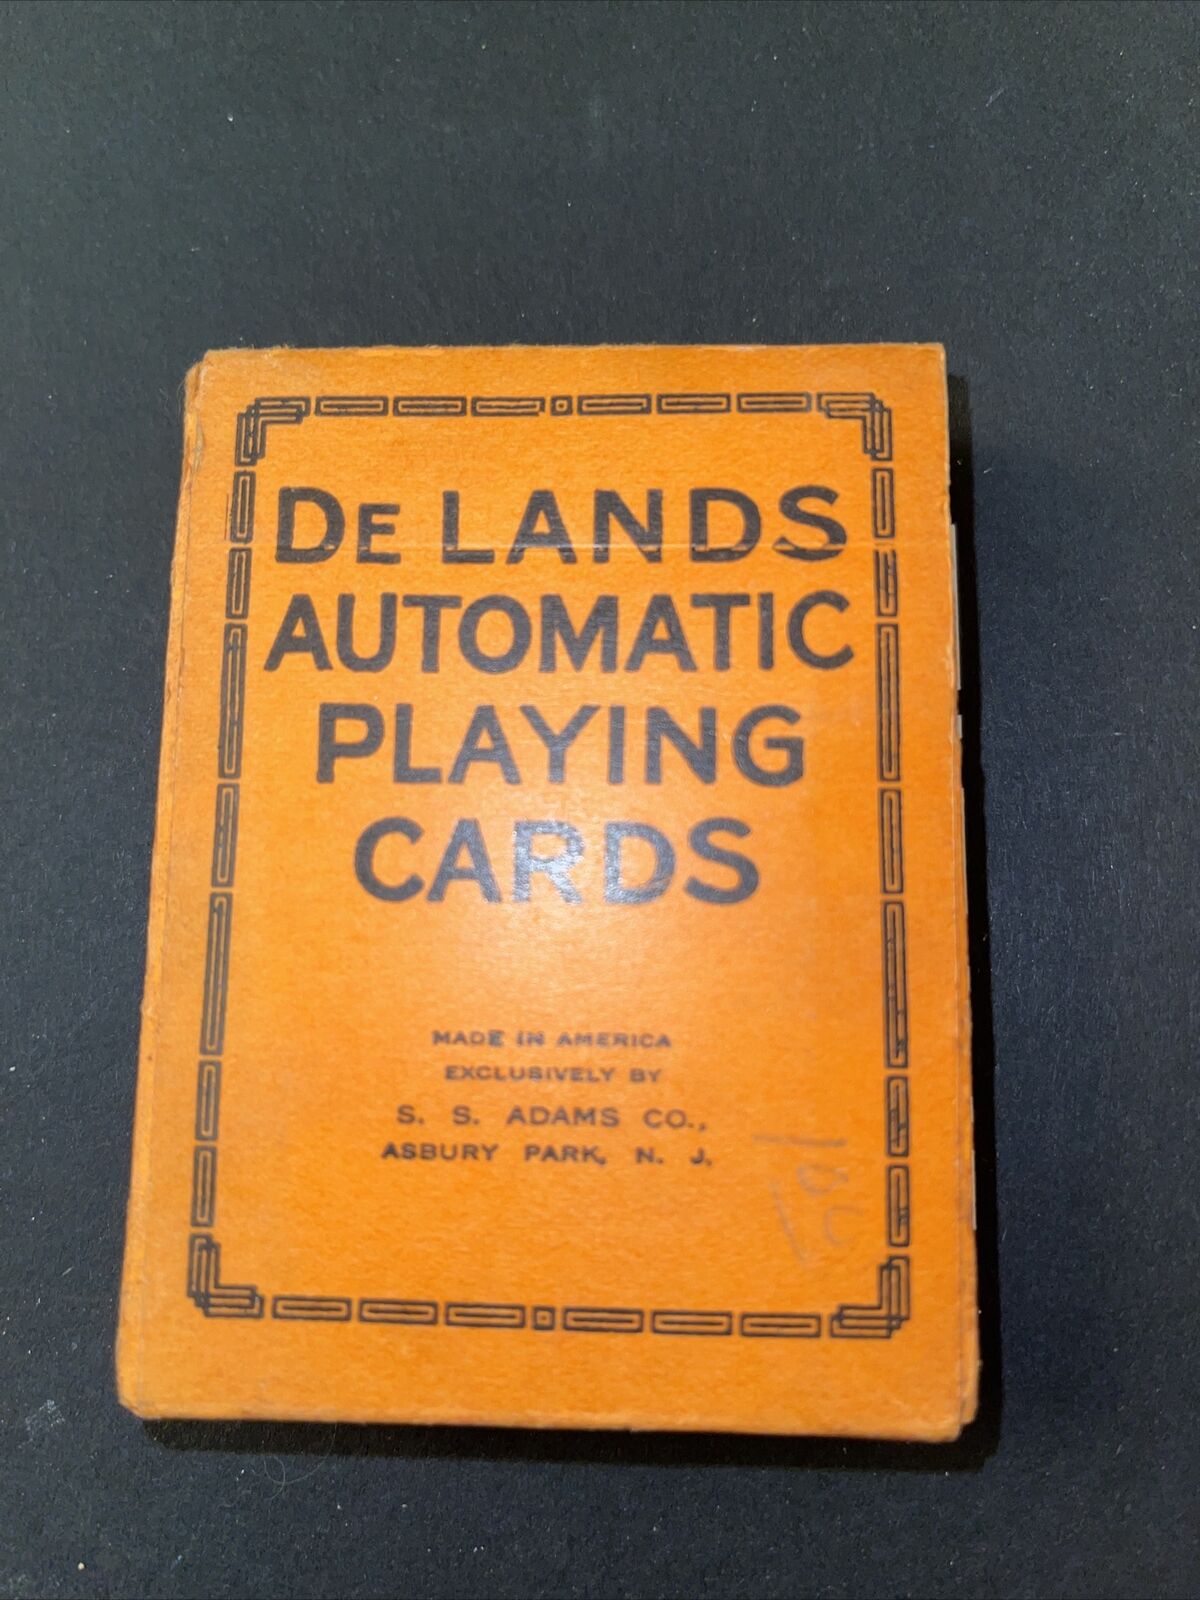 Antique DeLand's Automatic Playing Cards & Joker Tax Stamp